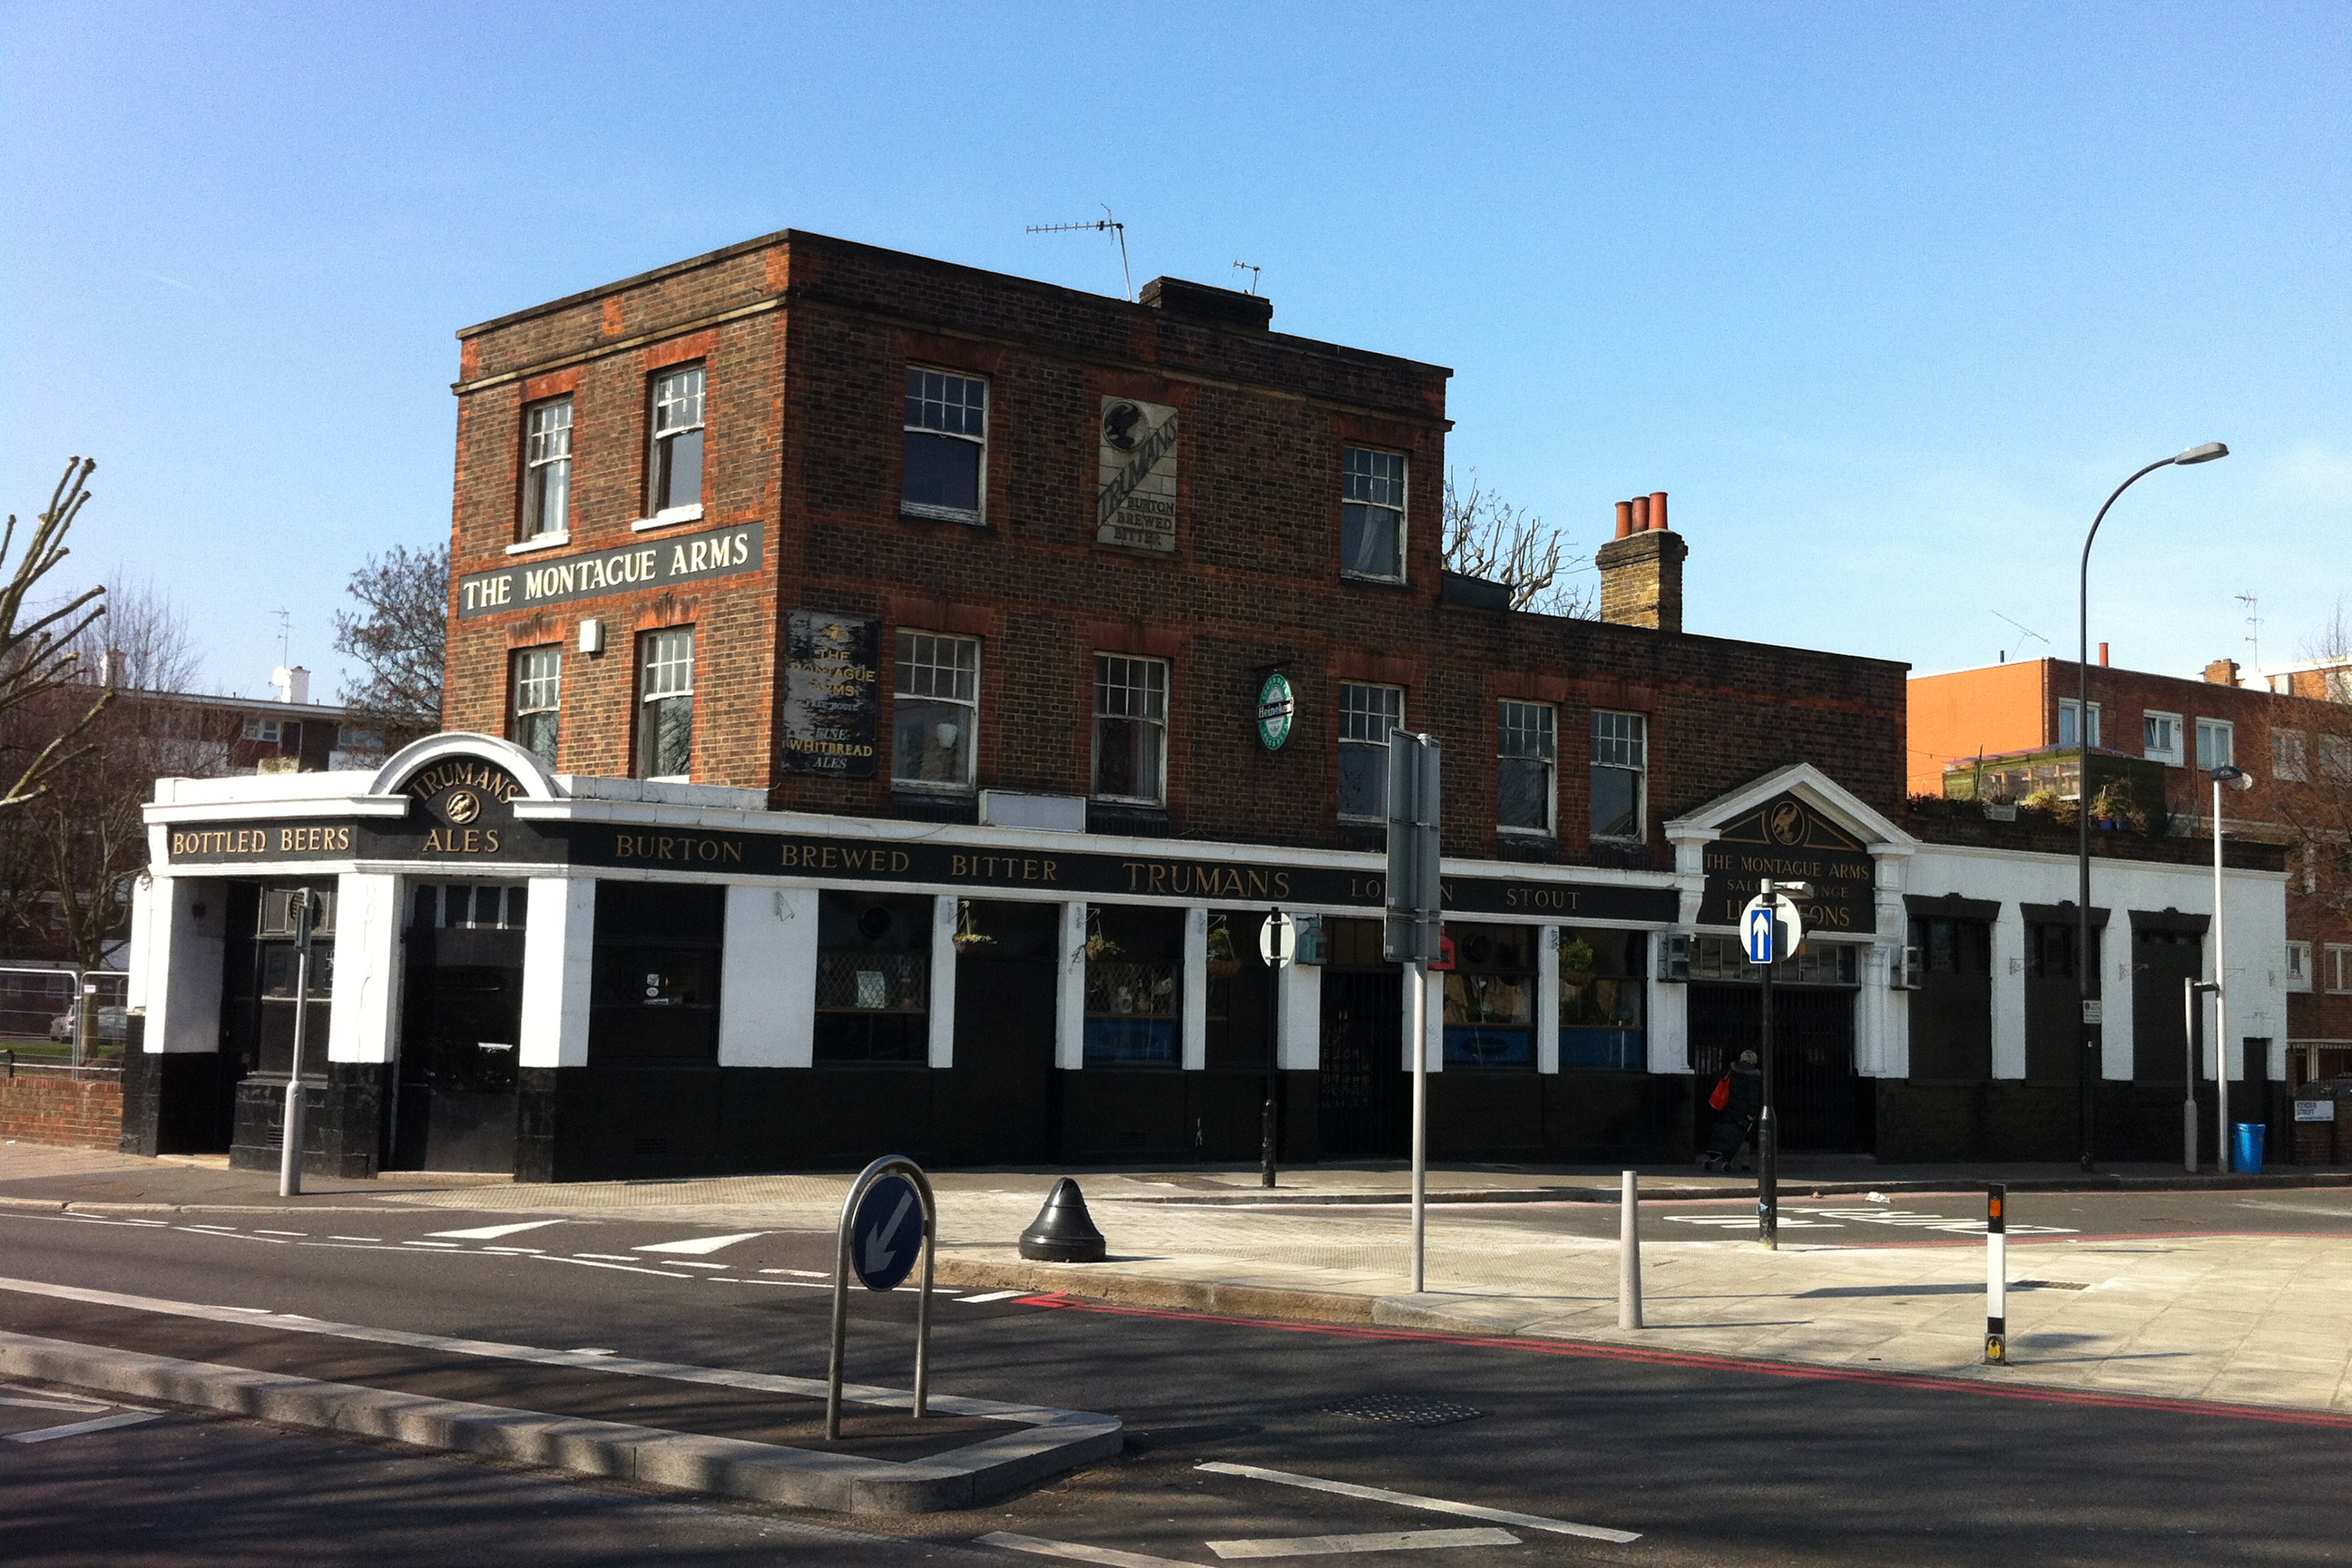 Public house in a prominent corner position. Acquired unconditionally for redevelopment. Queens Road, SE14, London Borough of Lewisham.